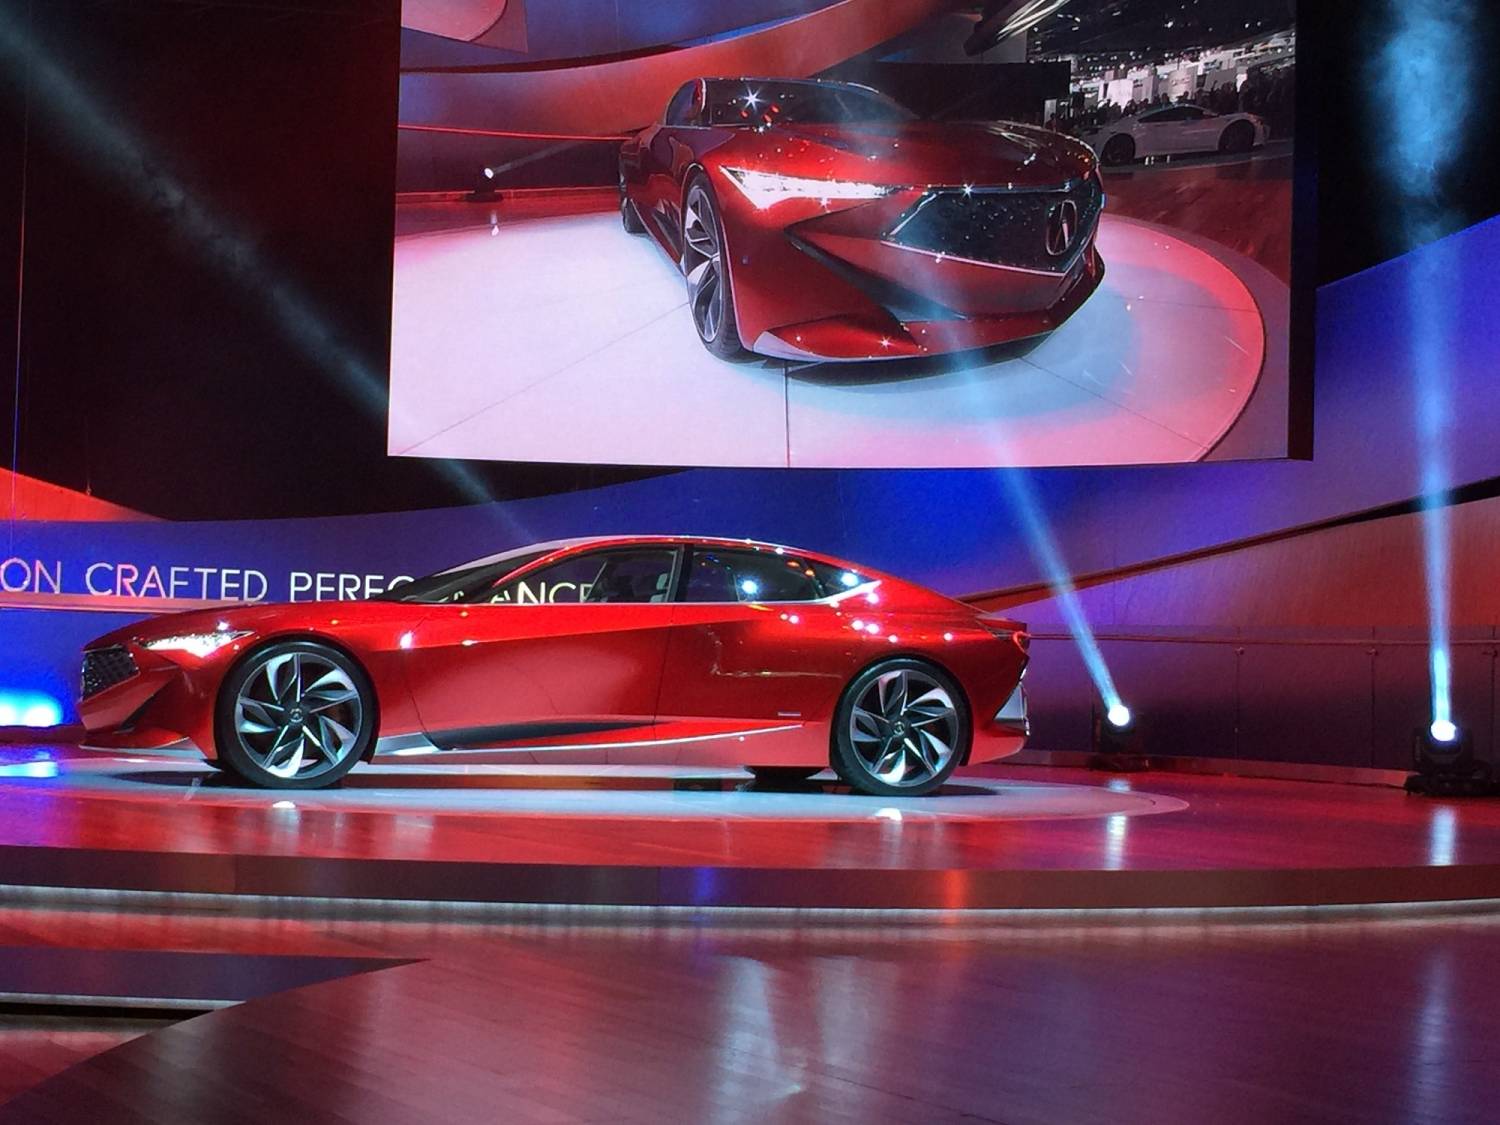 All The Hottest Rides From Detroit's North American International Auto Show